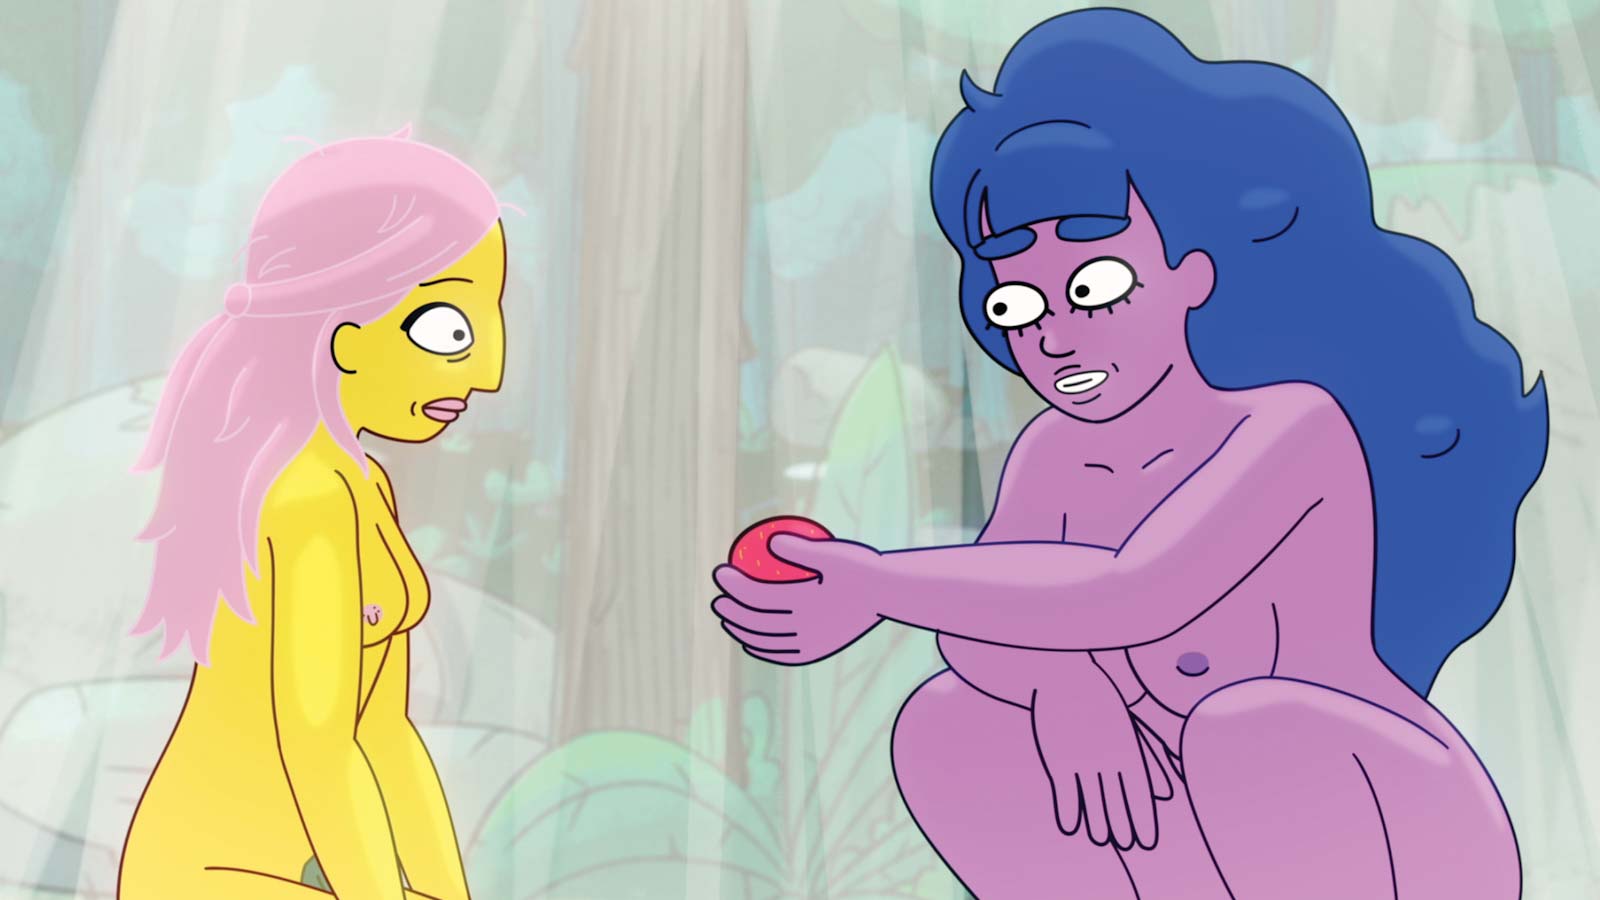 2 nude cartoon women, one handing an apple to the other